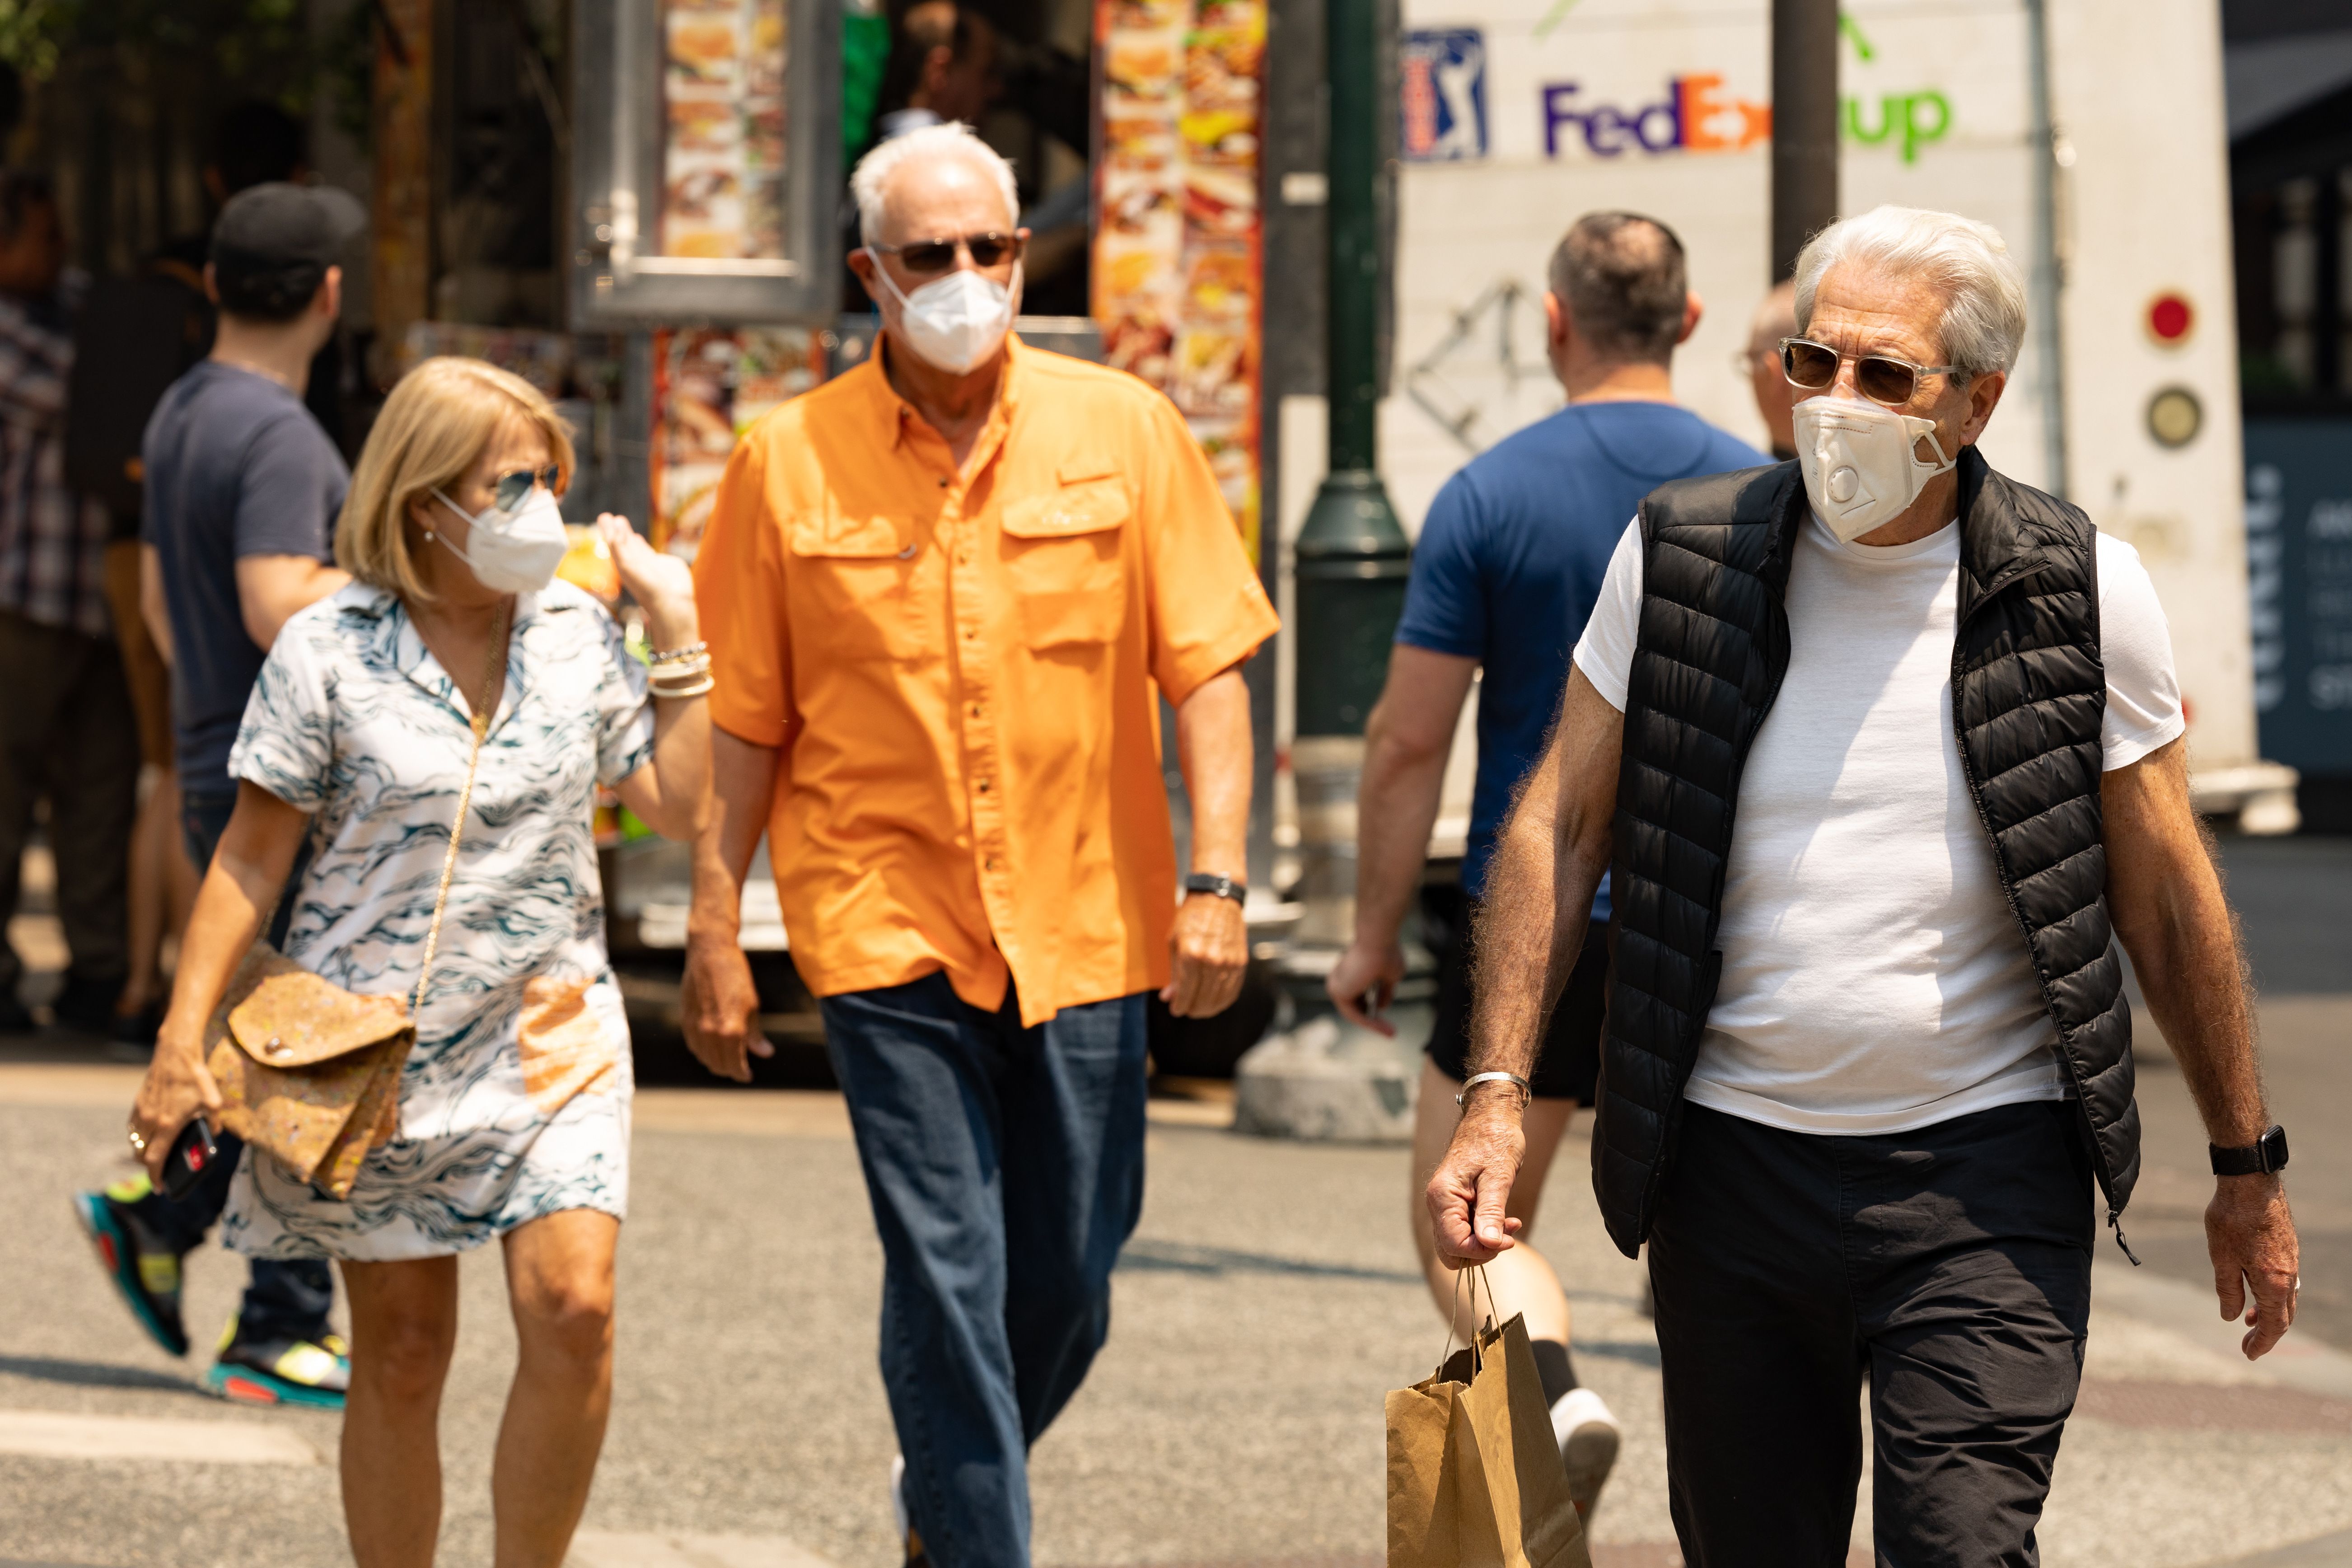 Pedestrians wear masks to protect themselves from wildfire smoke.